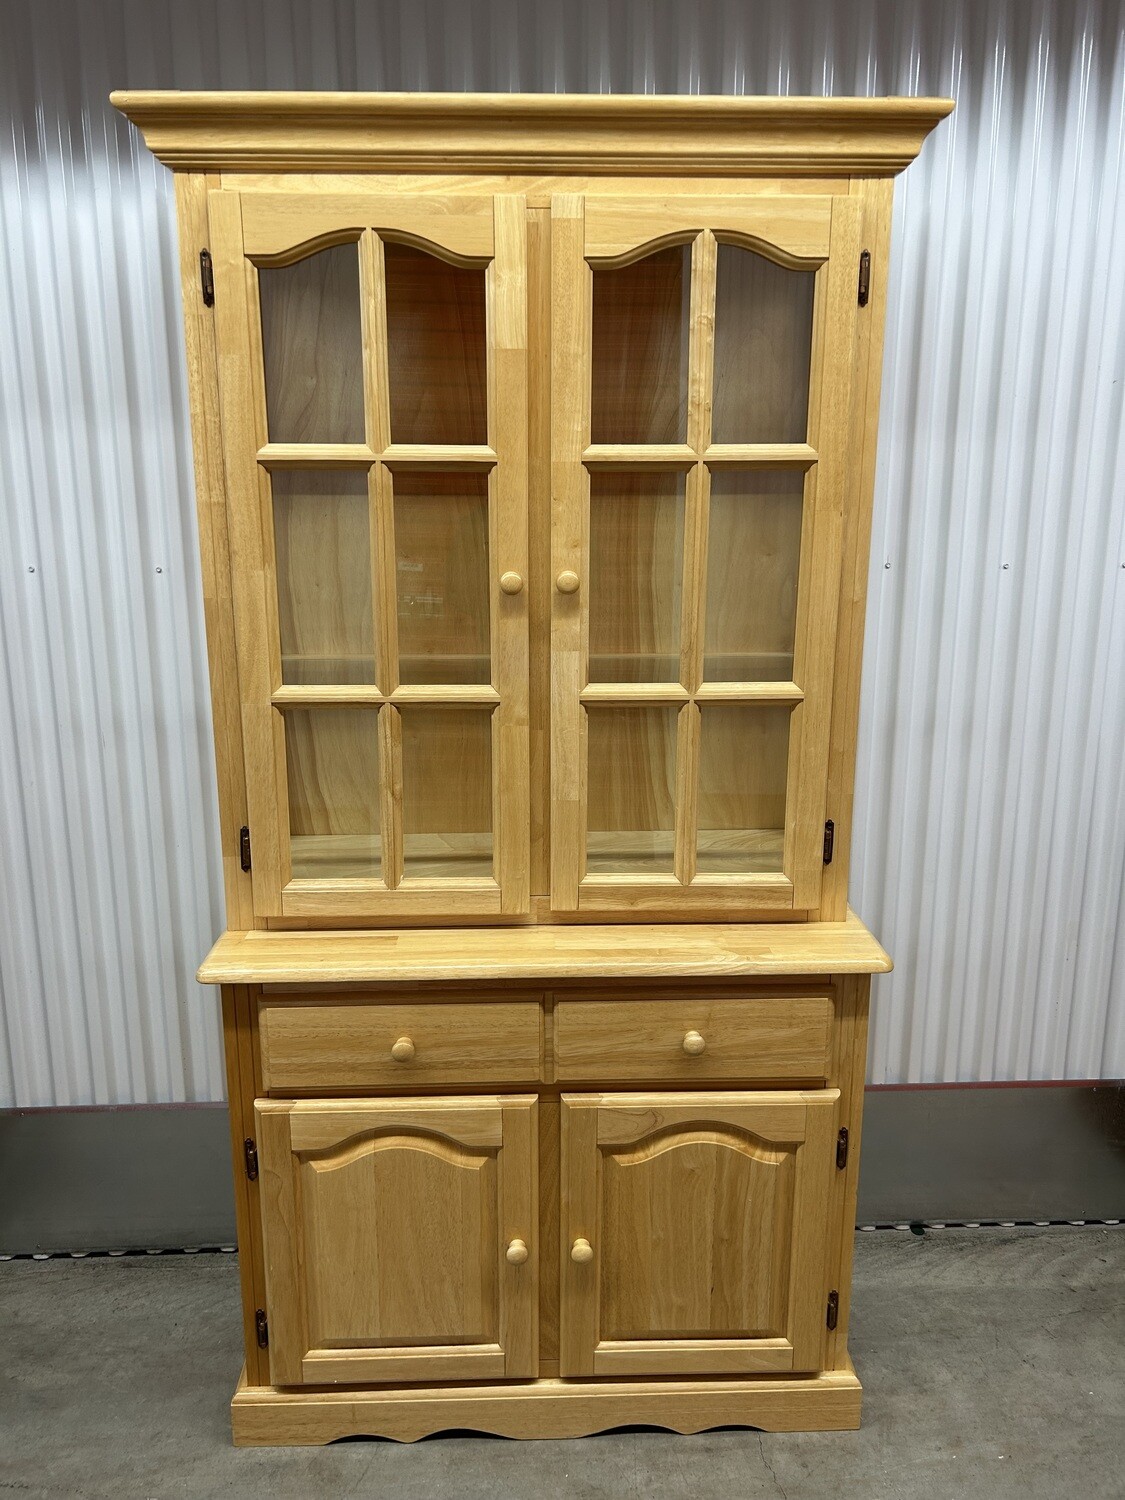 2-piece Lighted Hutch/ China Cabinet, blonde wood #2133